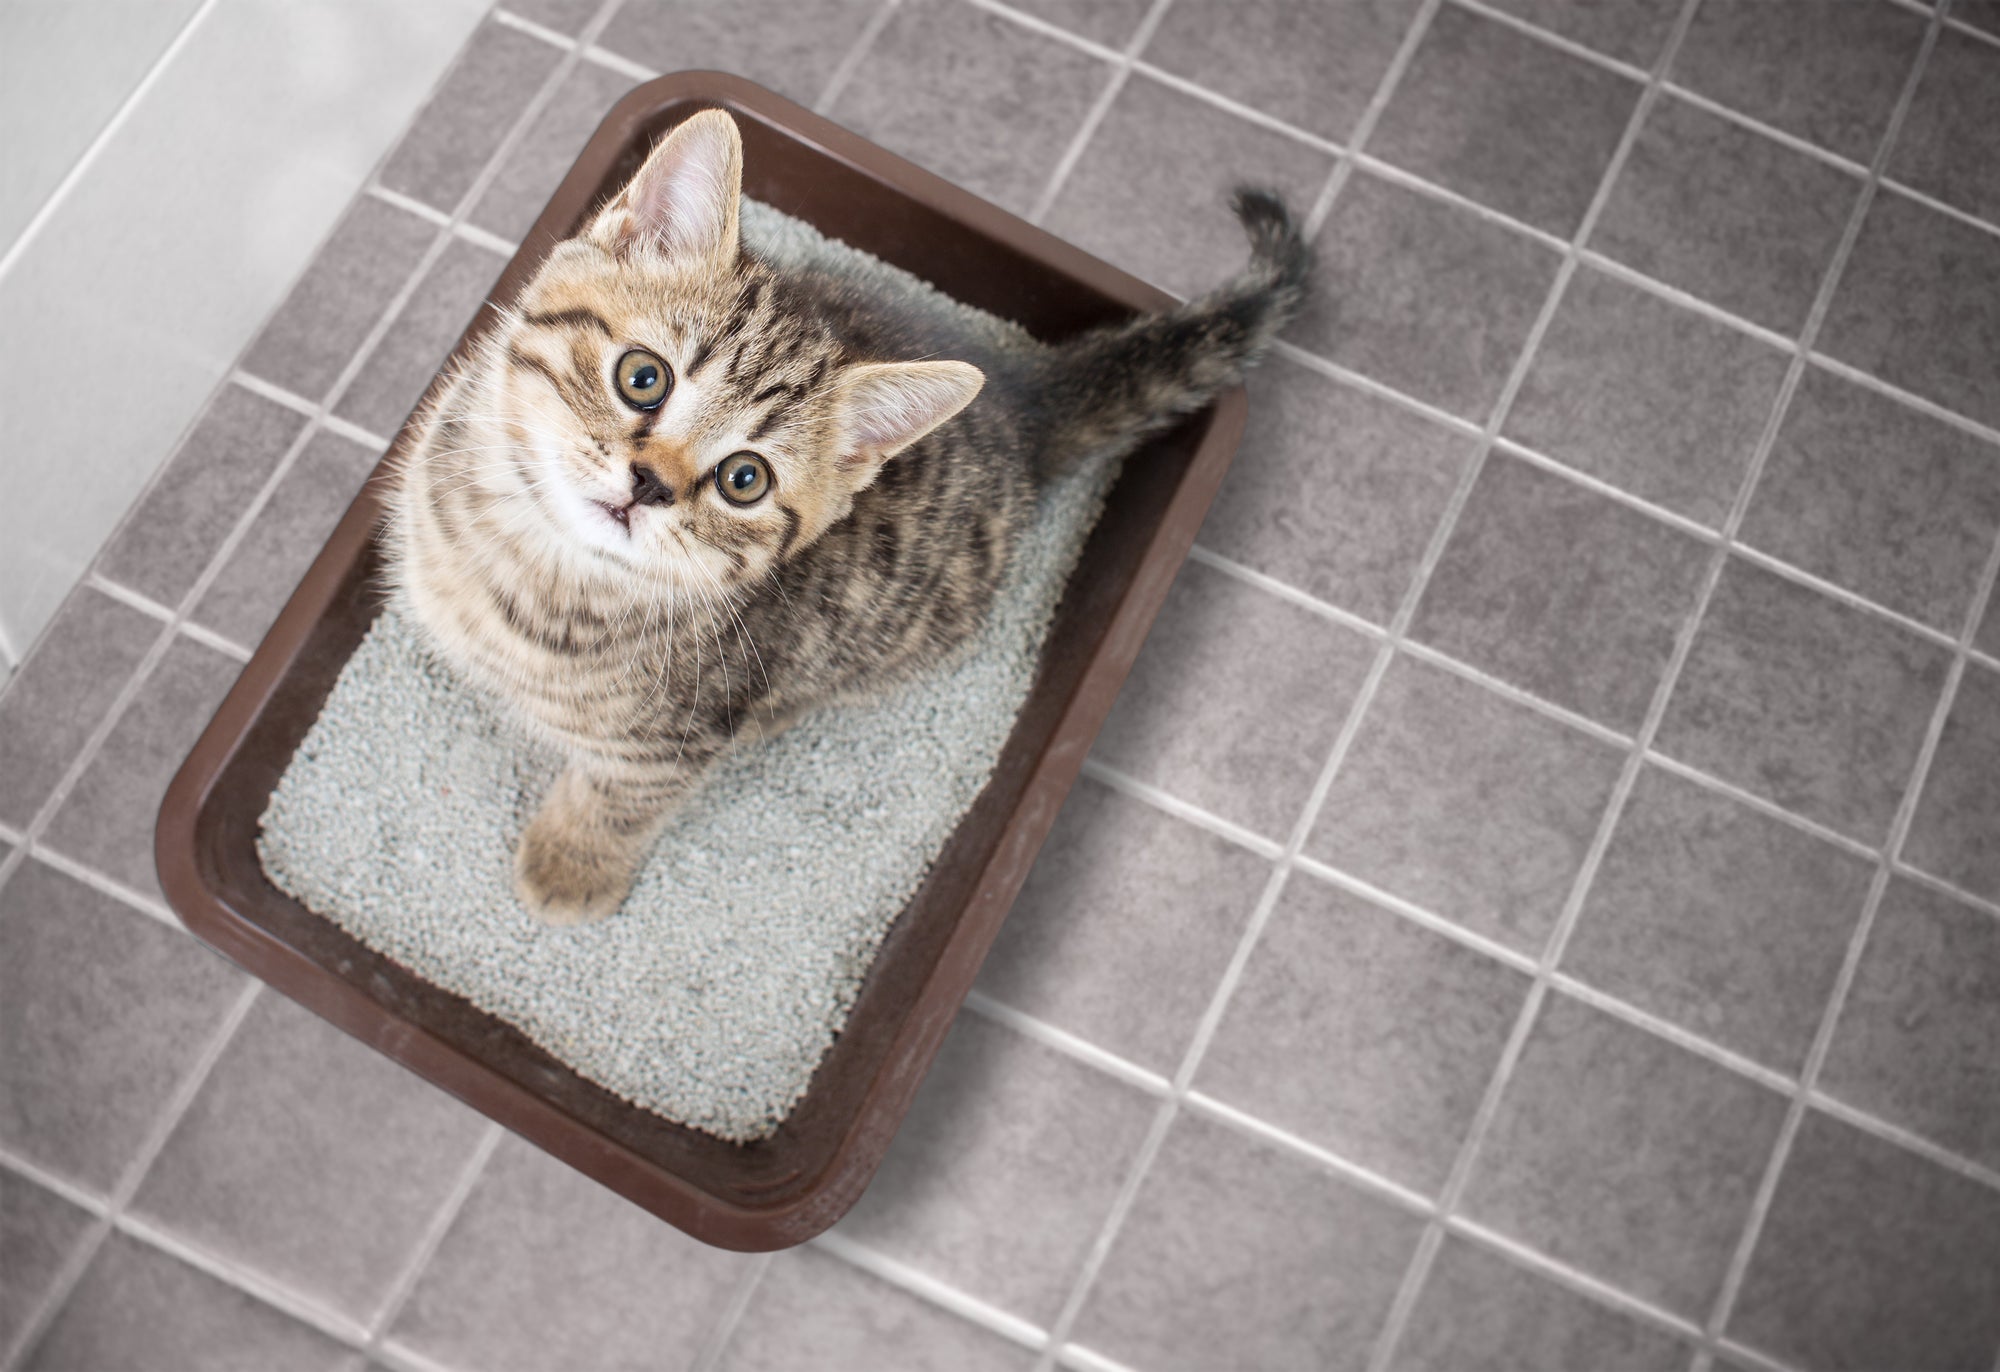 How Much Litter Should You Put in the Litter Box?